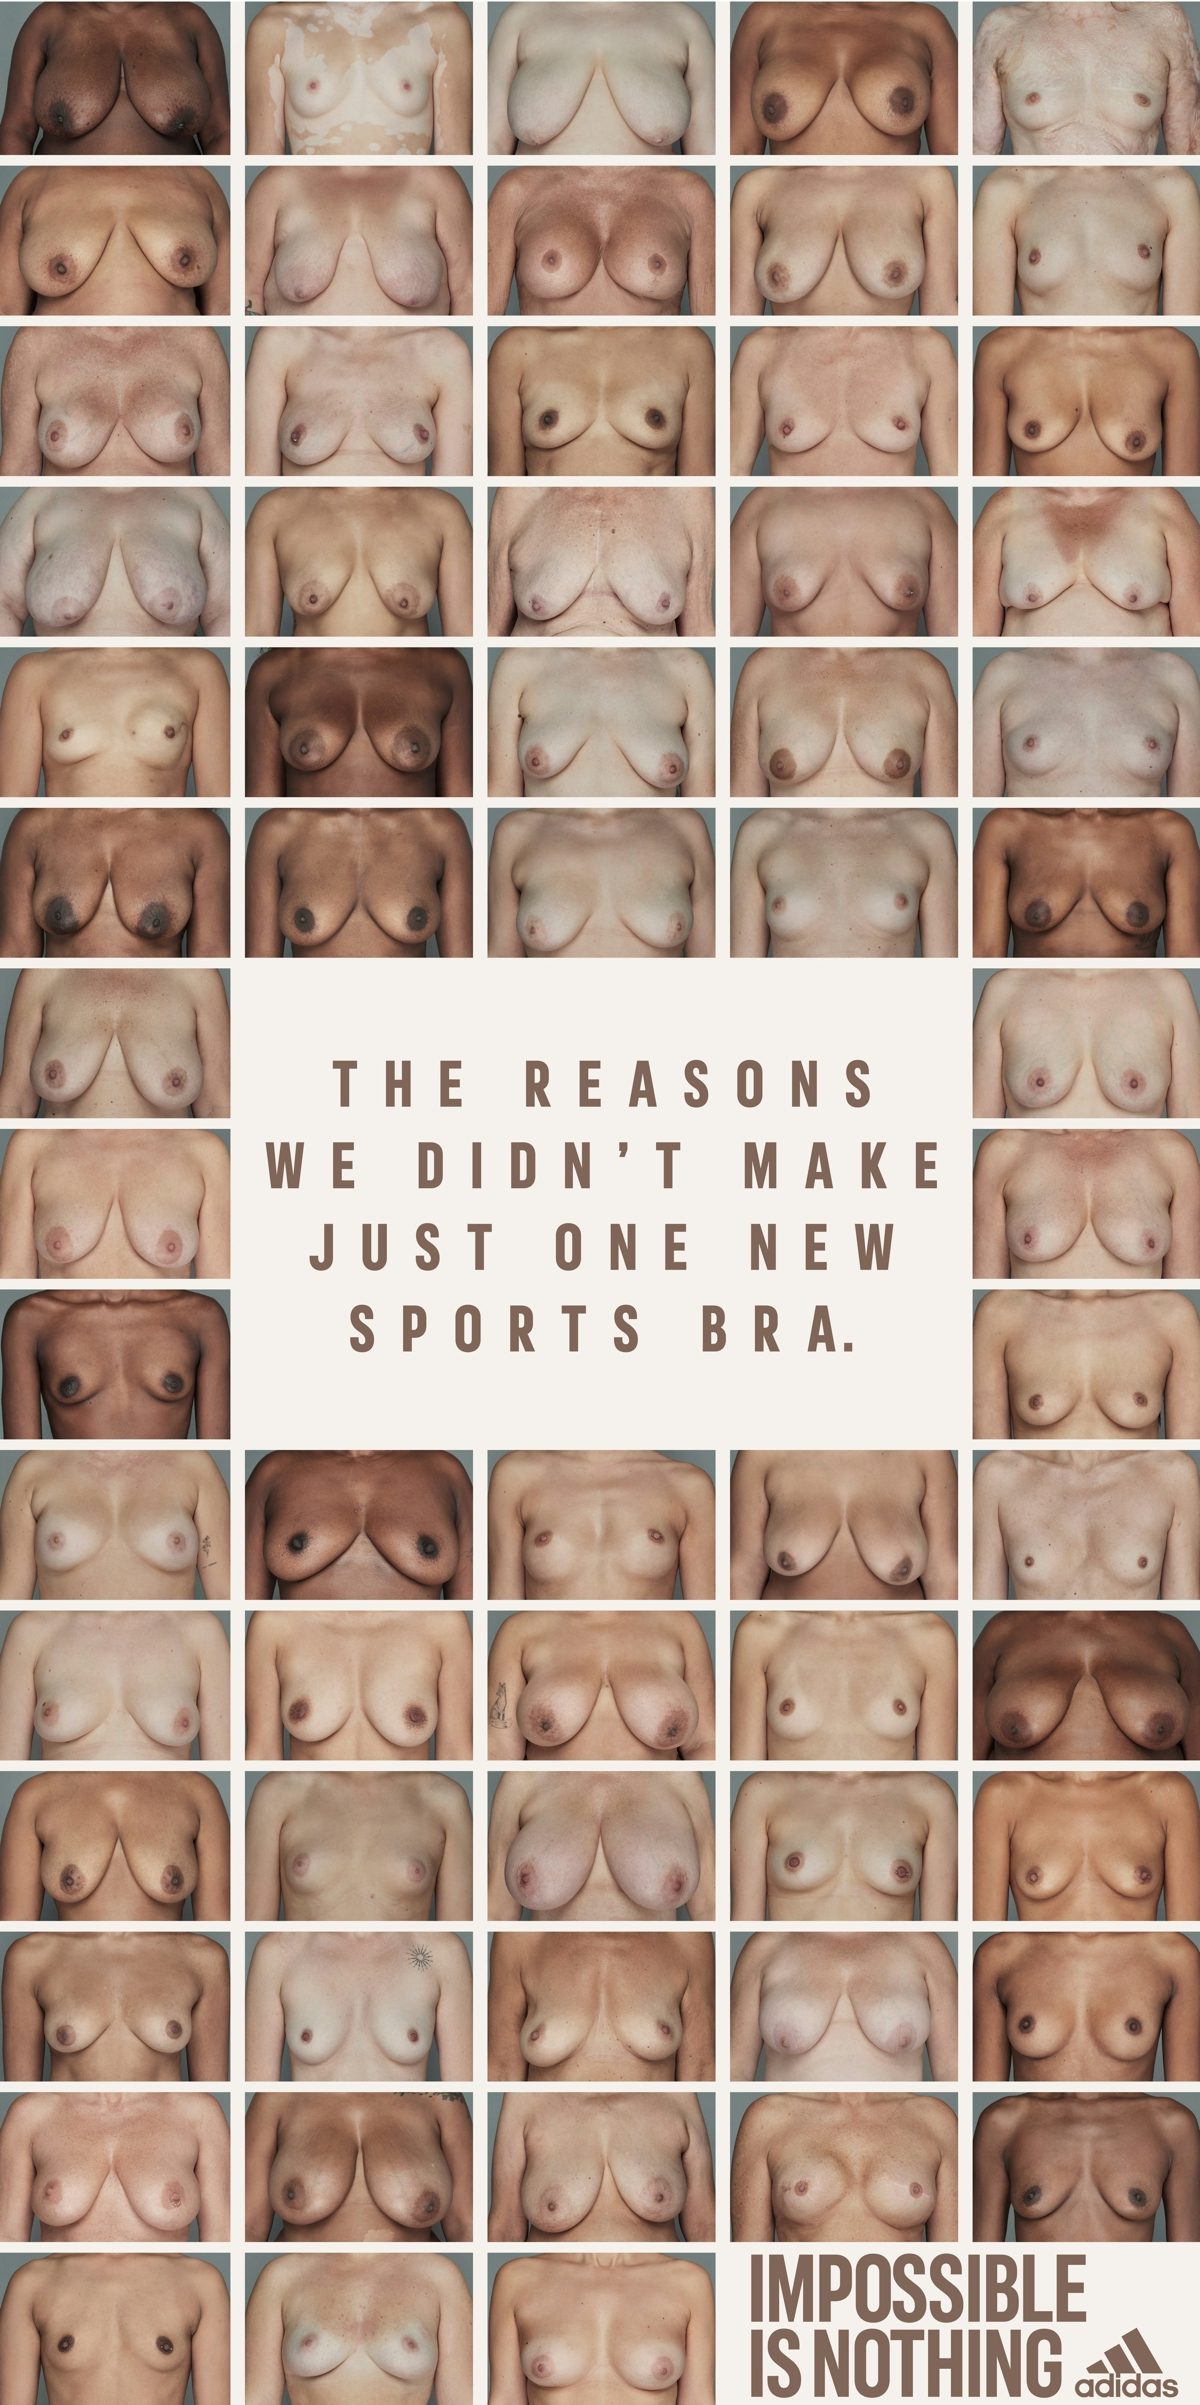 Unclothed Breast - Adidas created a gallery of naked breasts to launch its sports bra range